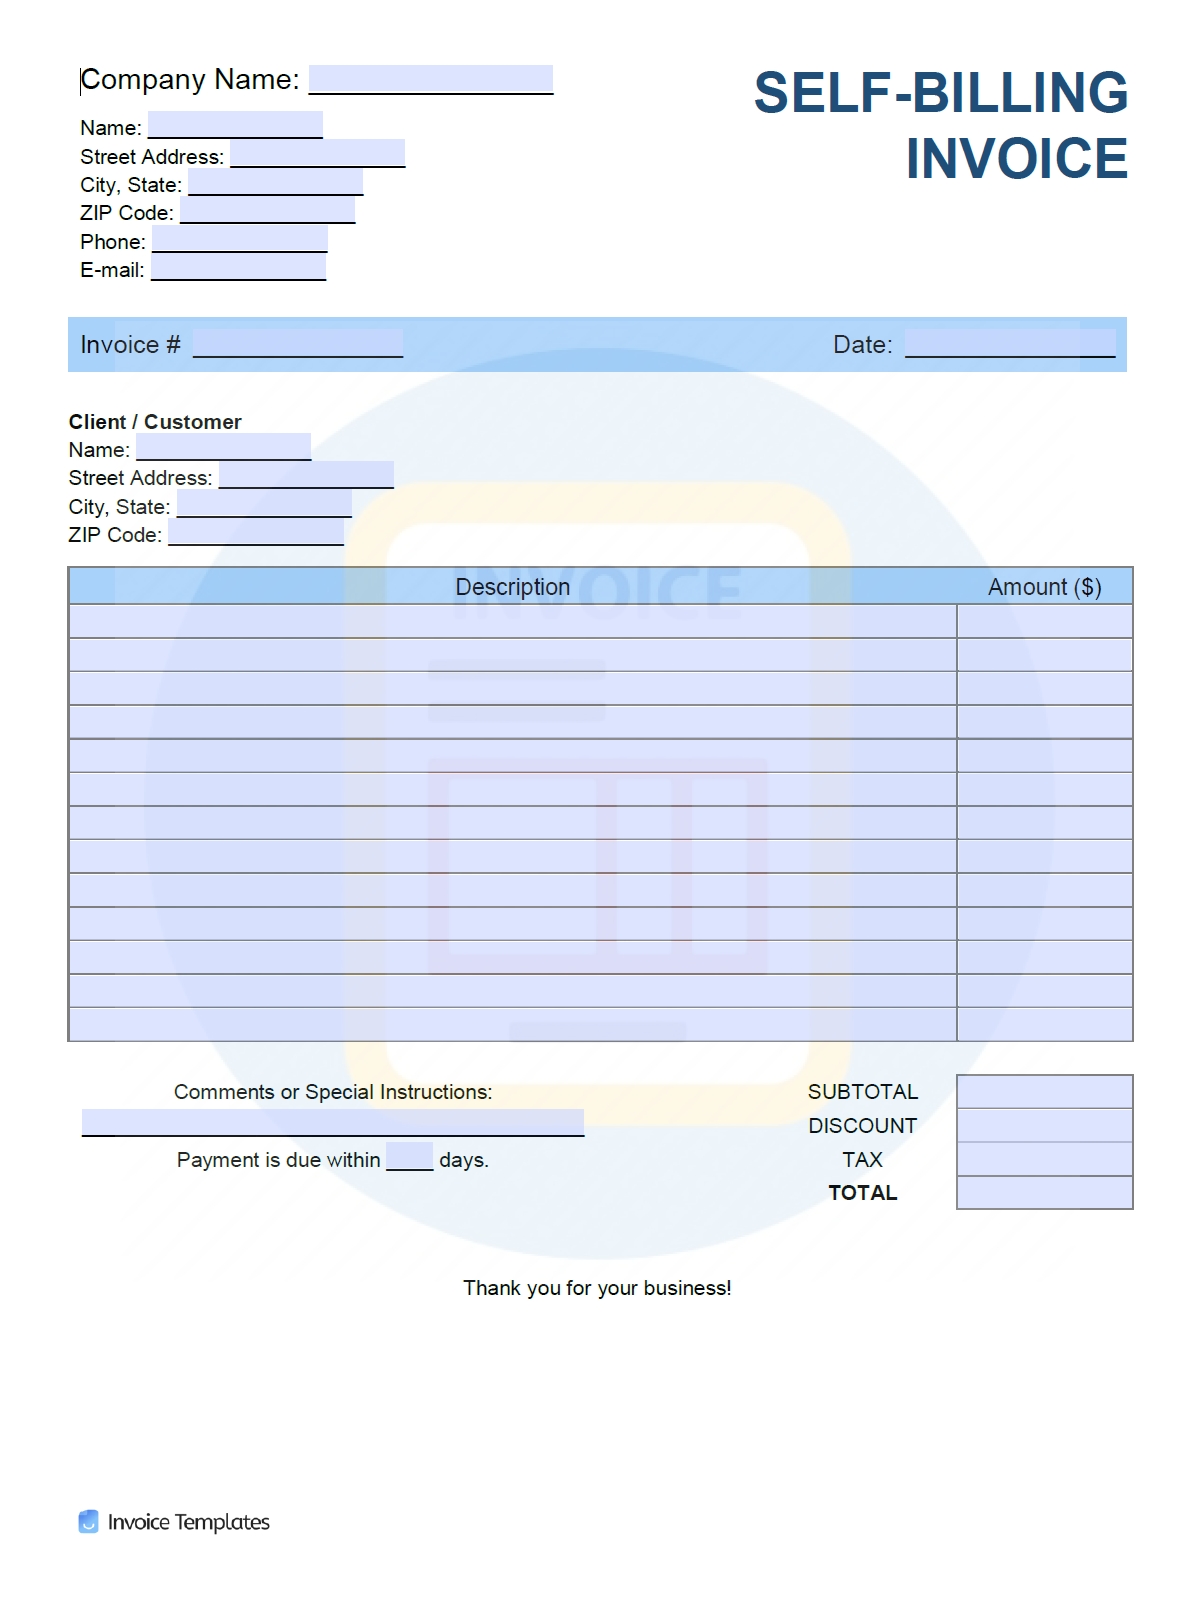 free self billing invoice template pdf word excel self billing invoice example